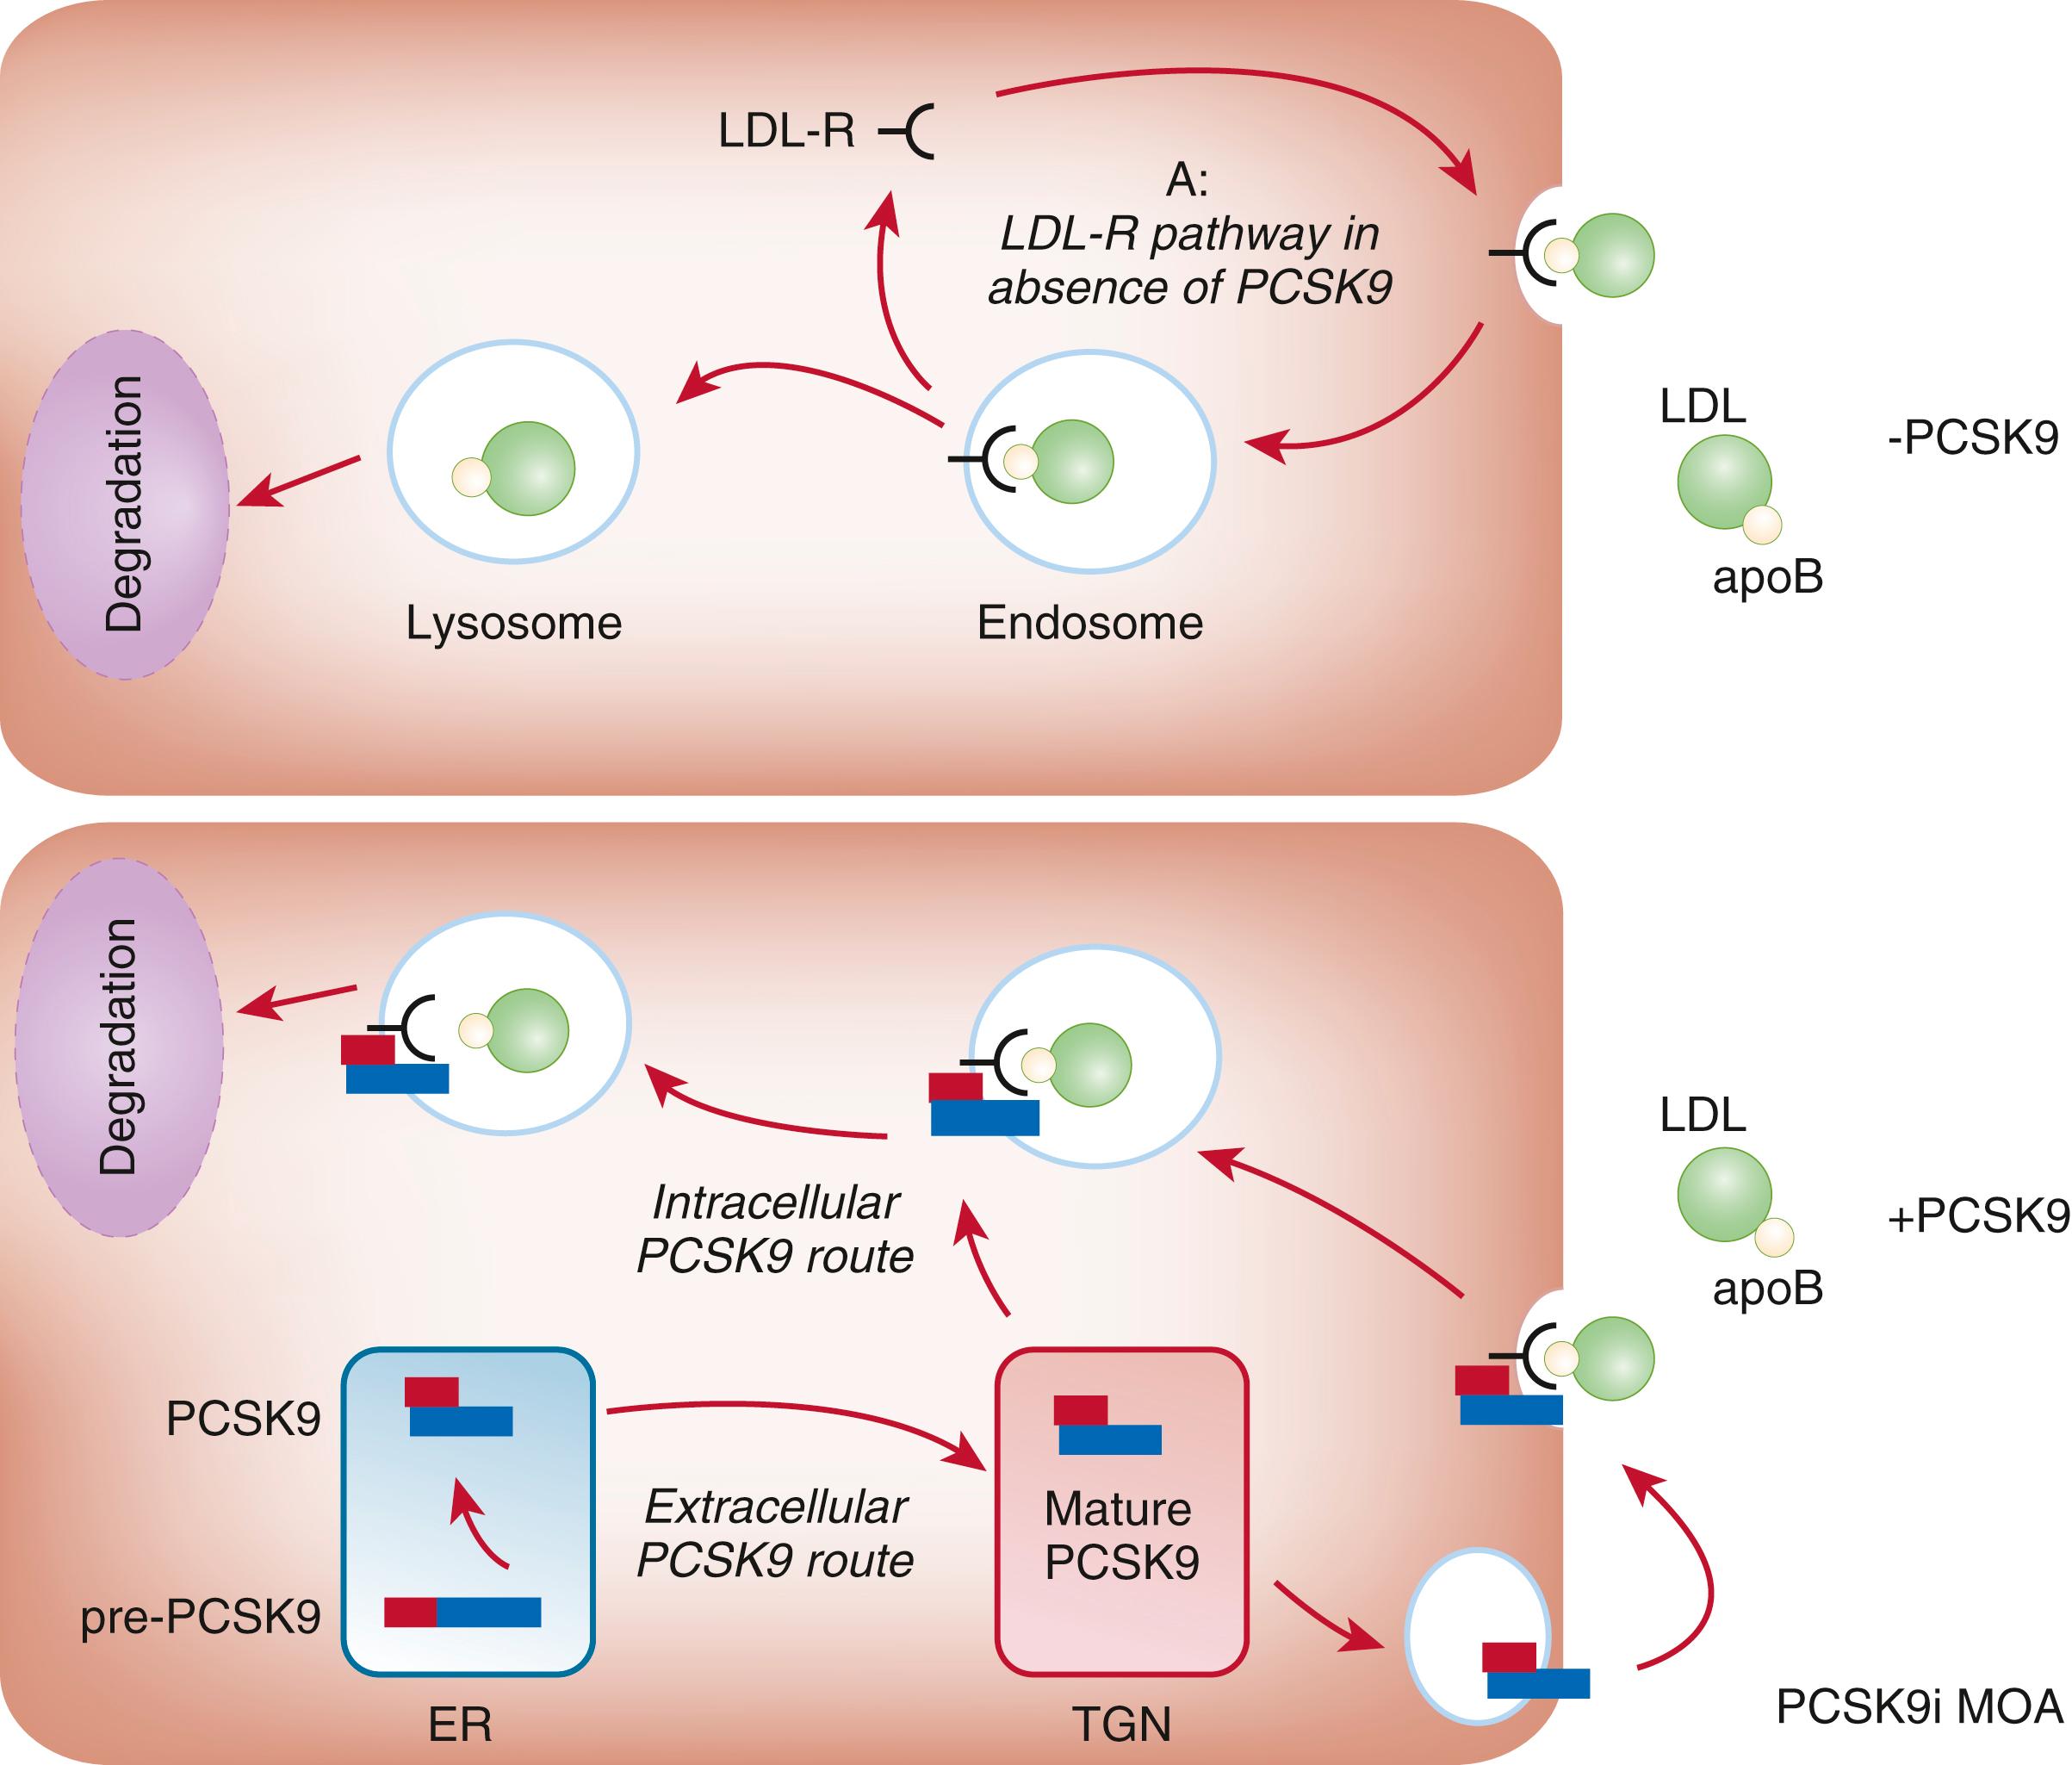 FIGURE 27.4, Diagram of a hepatocyte expressing the low-density lipoprotein receptor (LDL-R). Top panel, In the absence (or mAb blockade) of PCSK9, the LDL-R recycles rapidly to the cell surface. LDL particles are cleared by LDL by receptor-mediated endocytosis, thereby lowering LDL-C concentration in the blood. Bottom panel, PCSK9 chaperones the internalized LDL-R/LDL particle complex to the endosome-lysosomal compartment, where it undergoes degradation. The consequent decrease in LDL-R impairs LDL clearance, yielding accumulation of cholesterol-rich LDL particles in the blood. ER, Endoplasmic reticulum; TGN, trans Golgi network.